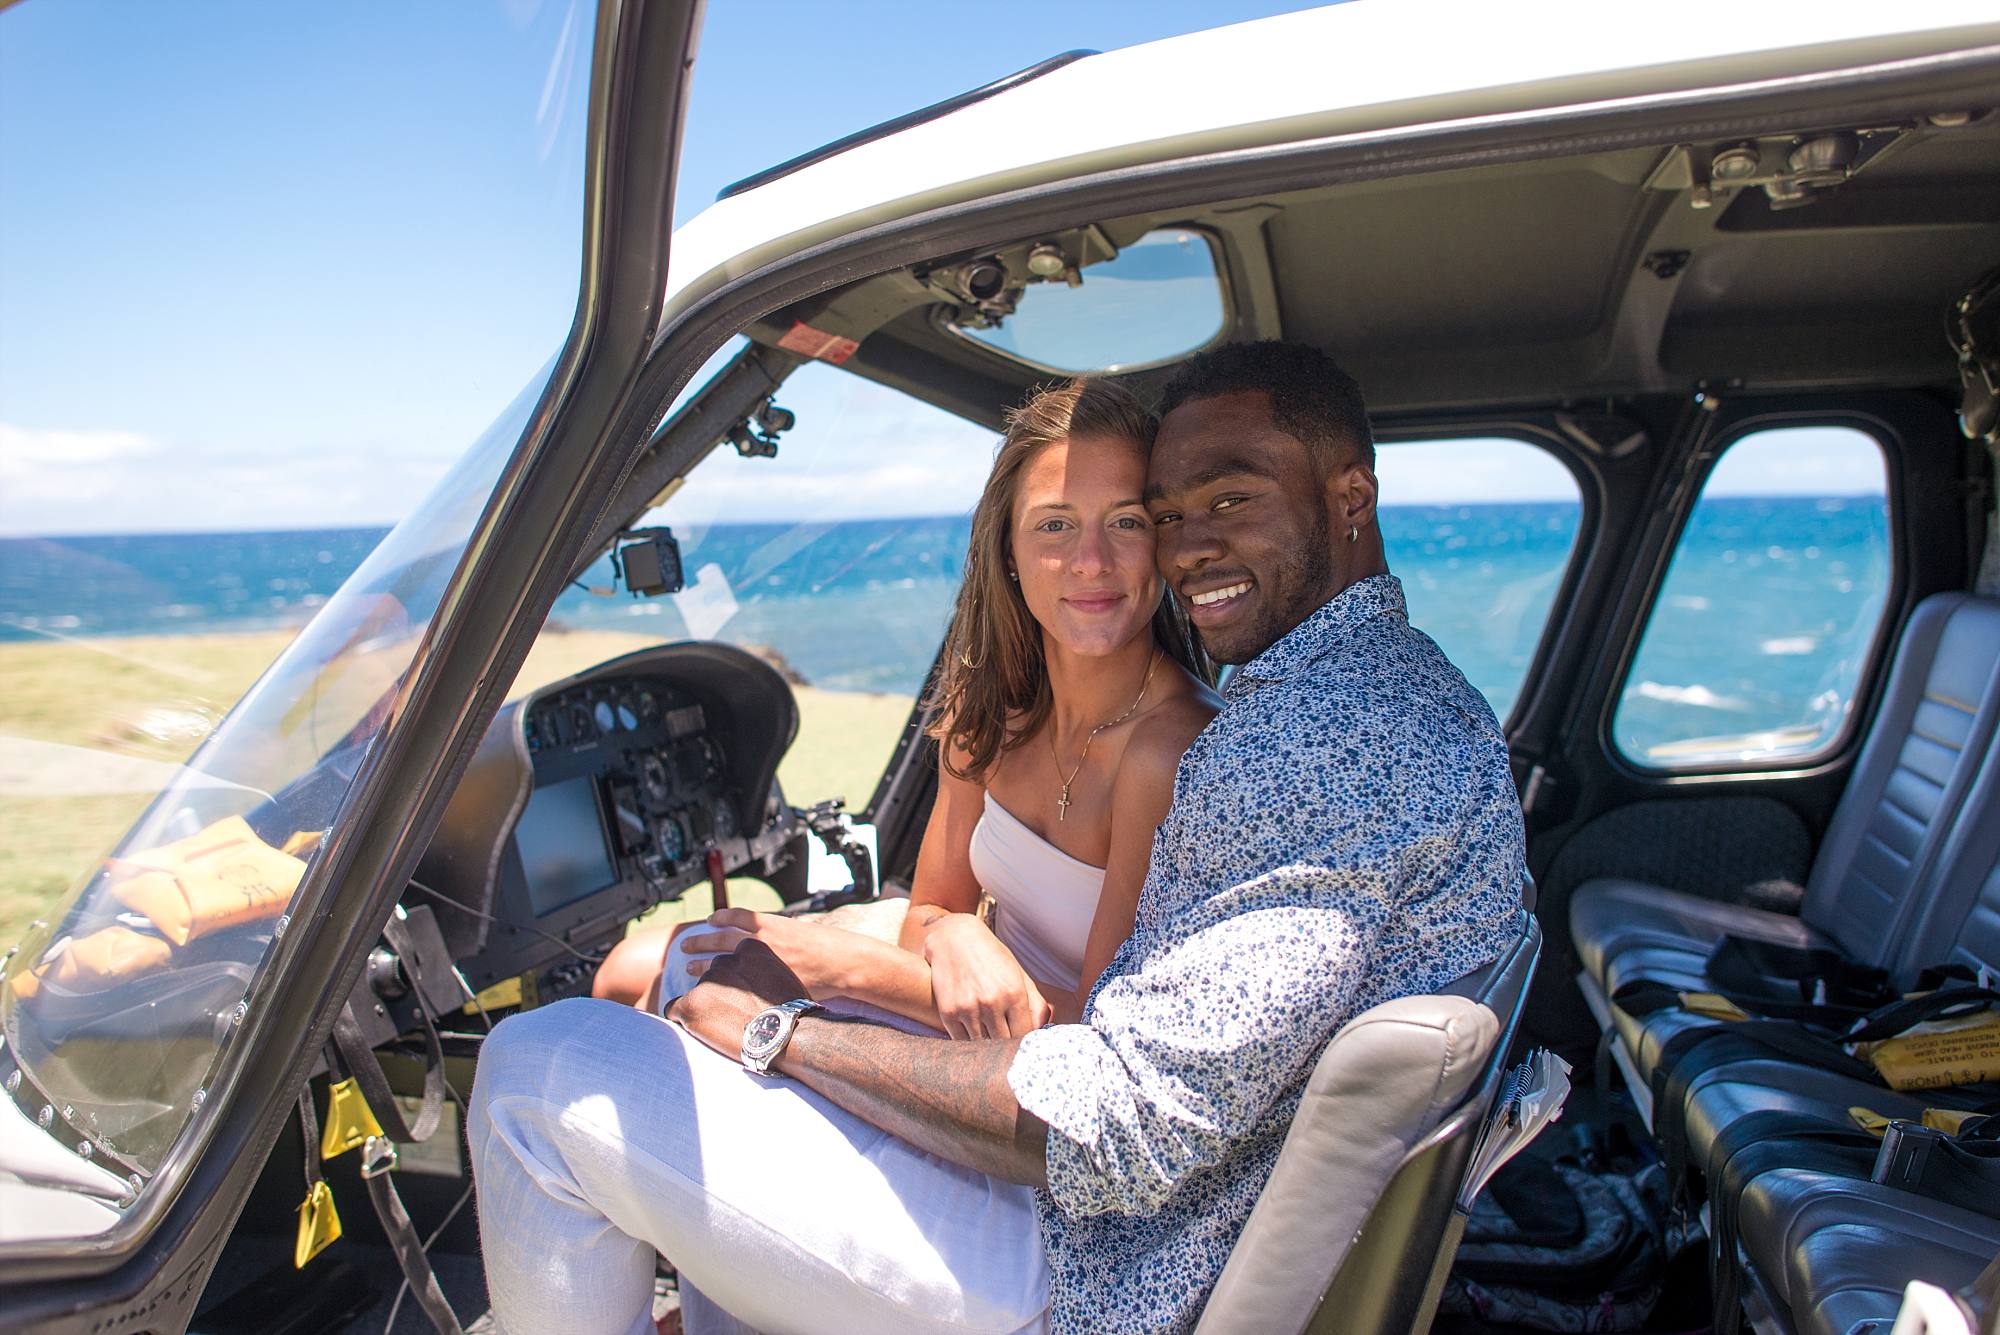 Maui-Helicopter-Proposal-with-Patriots-Wide-Receiver-Brandin-Cooks_0025.jpg